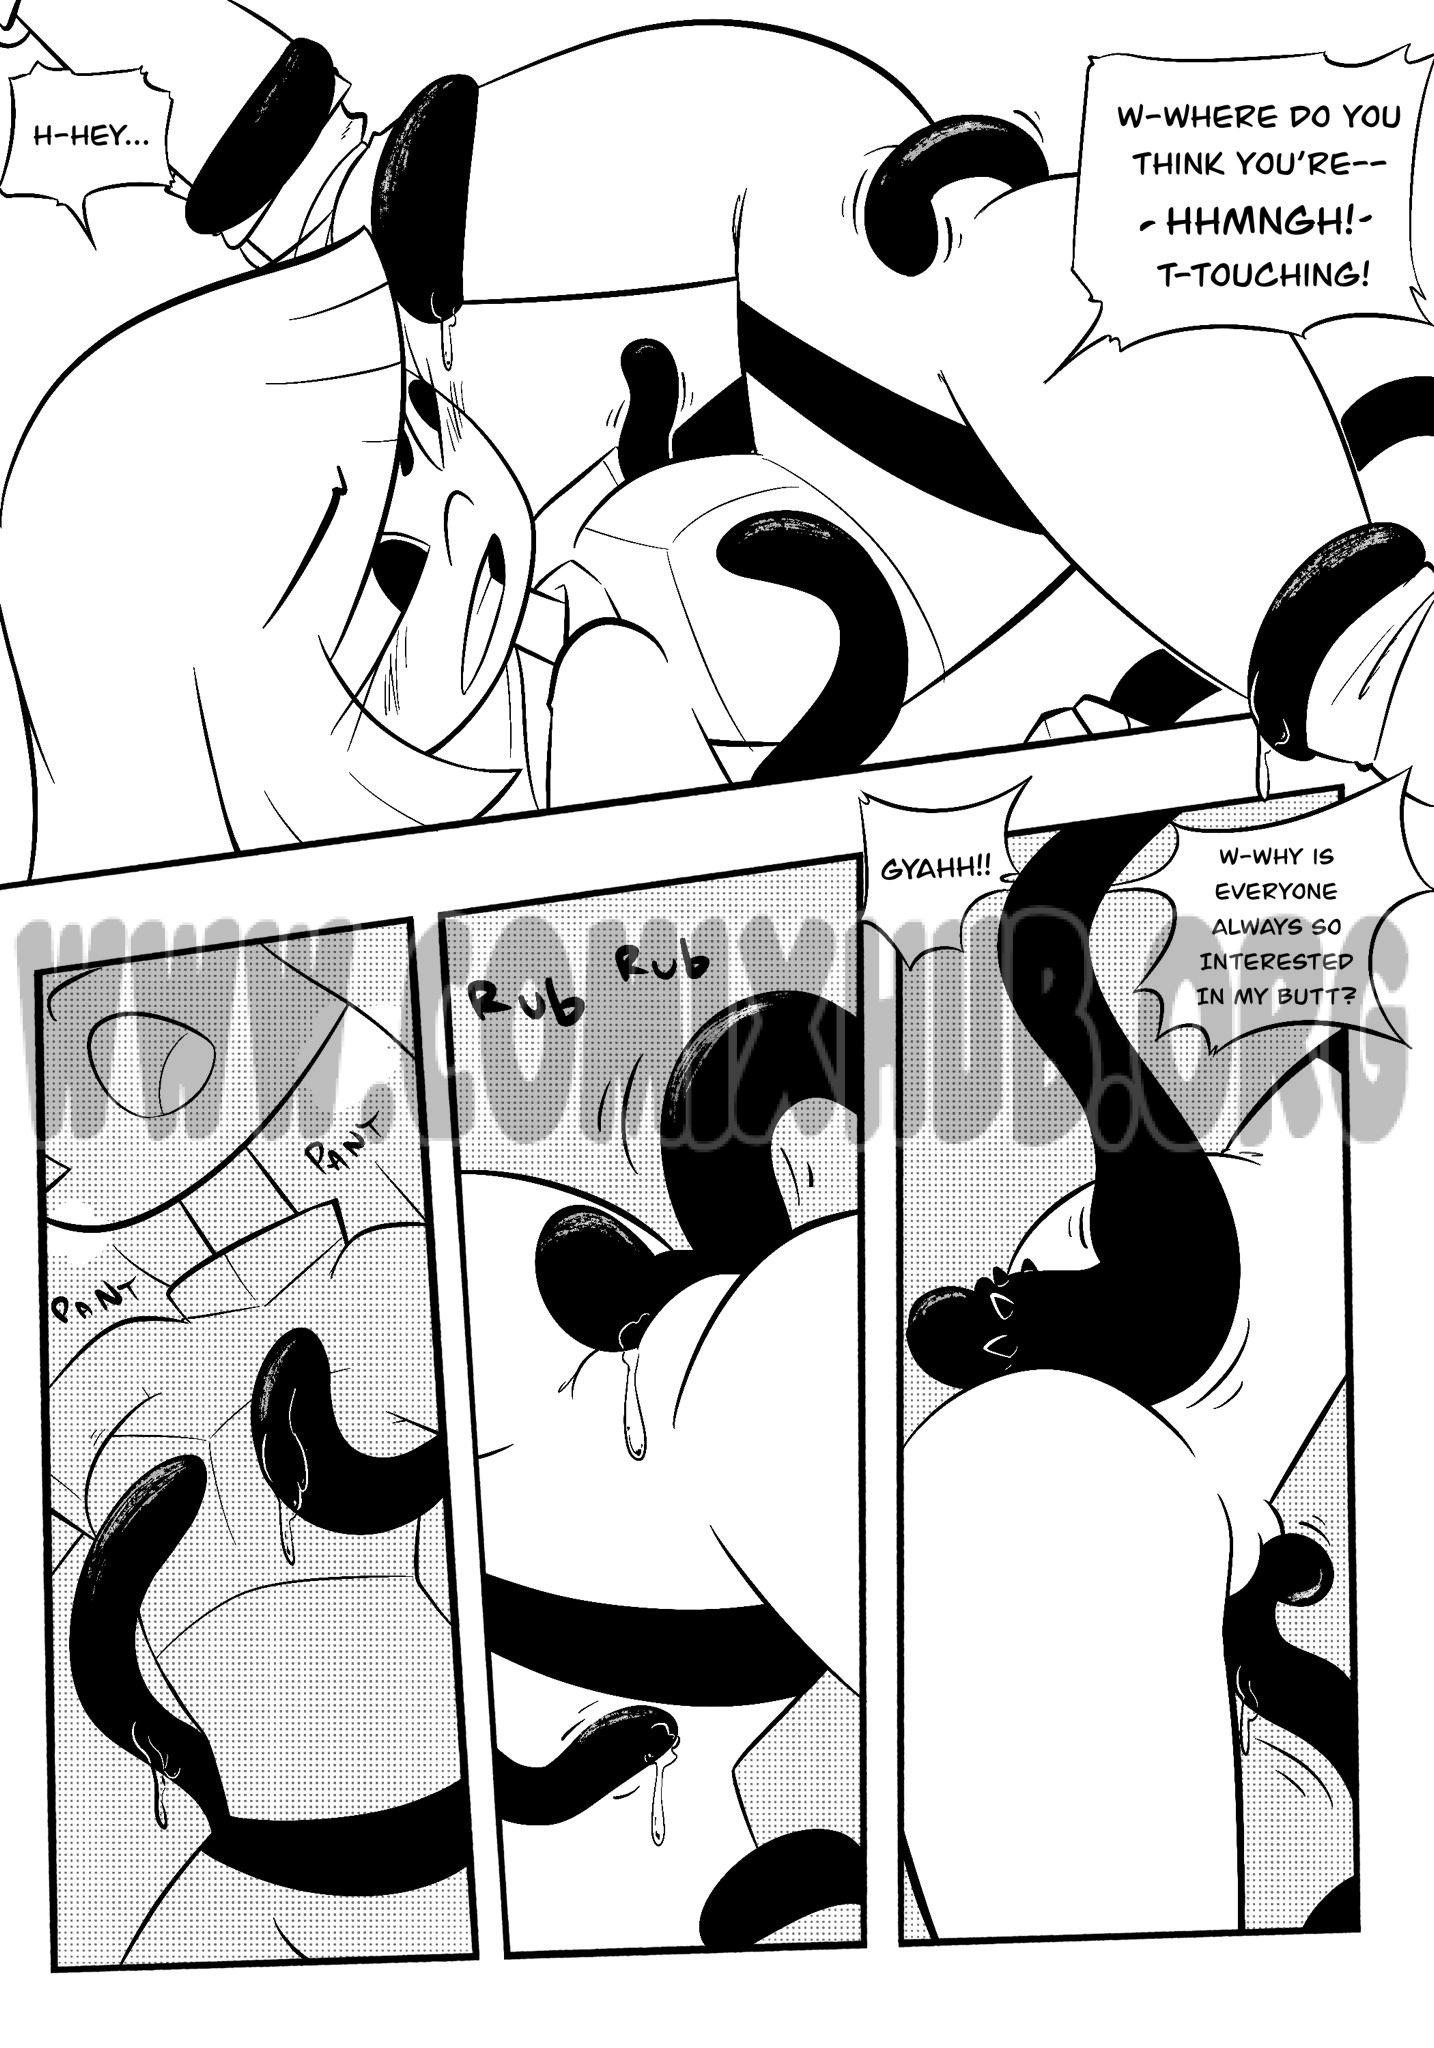 Miko Commic porn comics Oral sex, Anal Sex, Blowjob, Creampie, Cum Swallow, Double Penetration, Straight, Tentacles, X-Ray